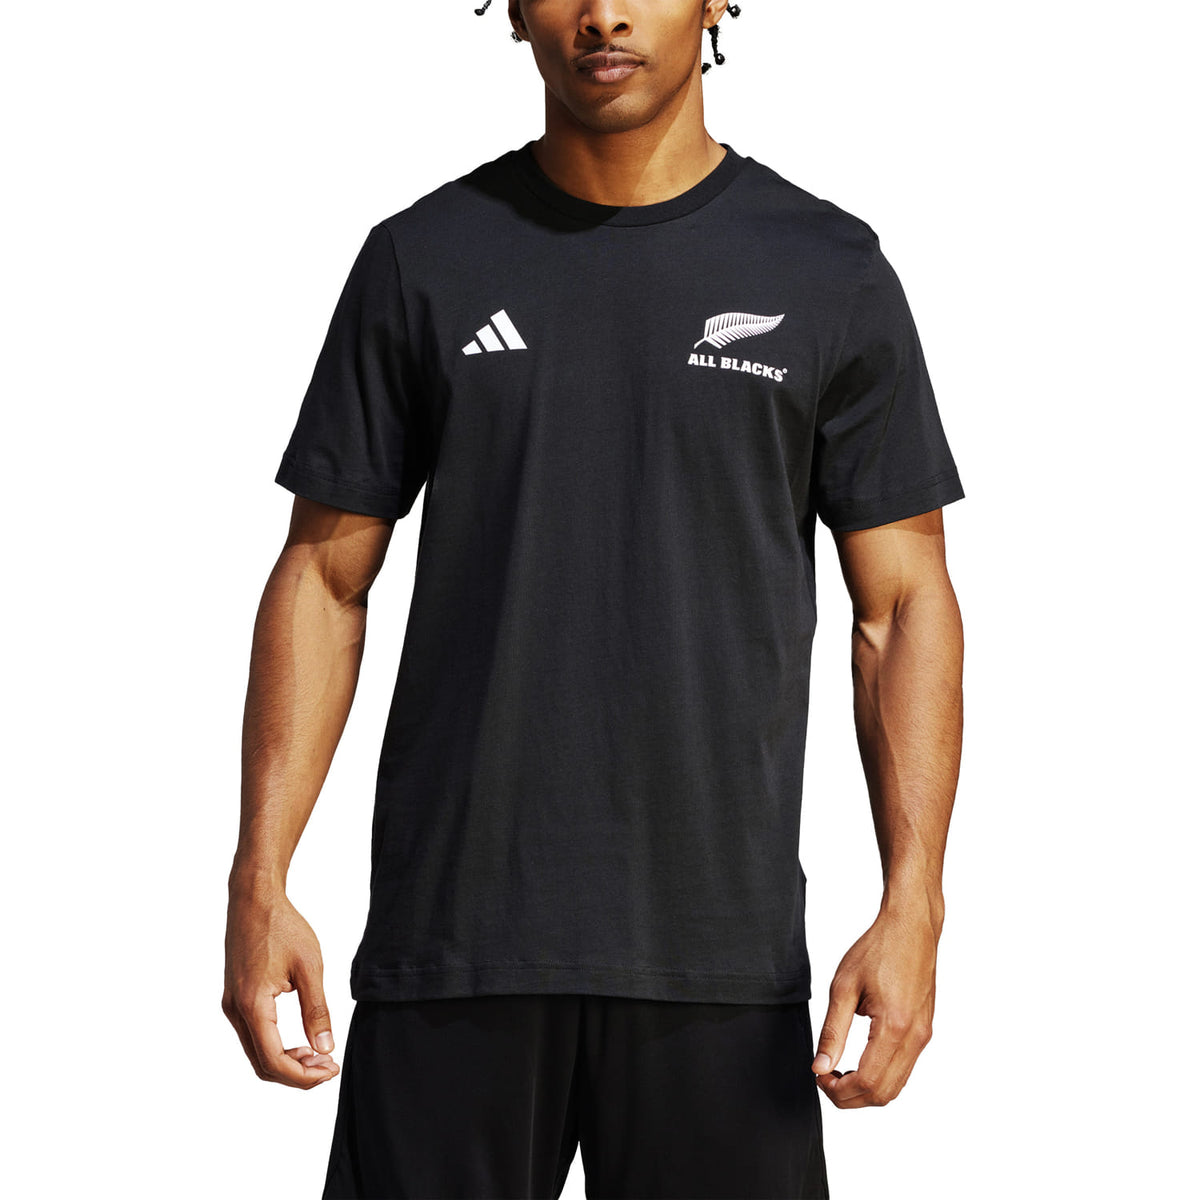 T-shirt all Blacks Rugby Cotone Adidas Ufficiale